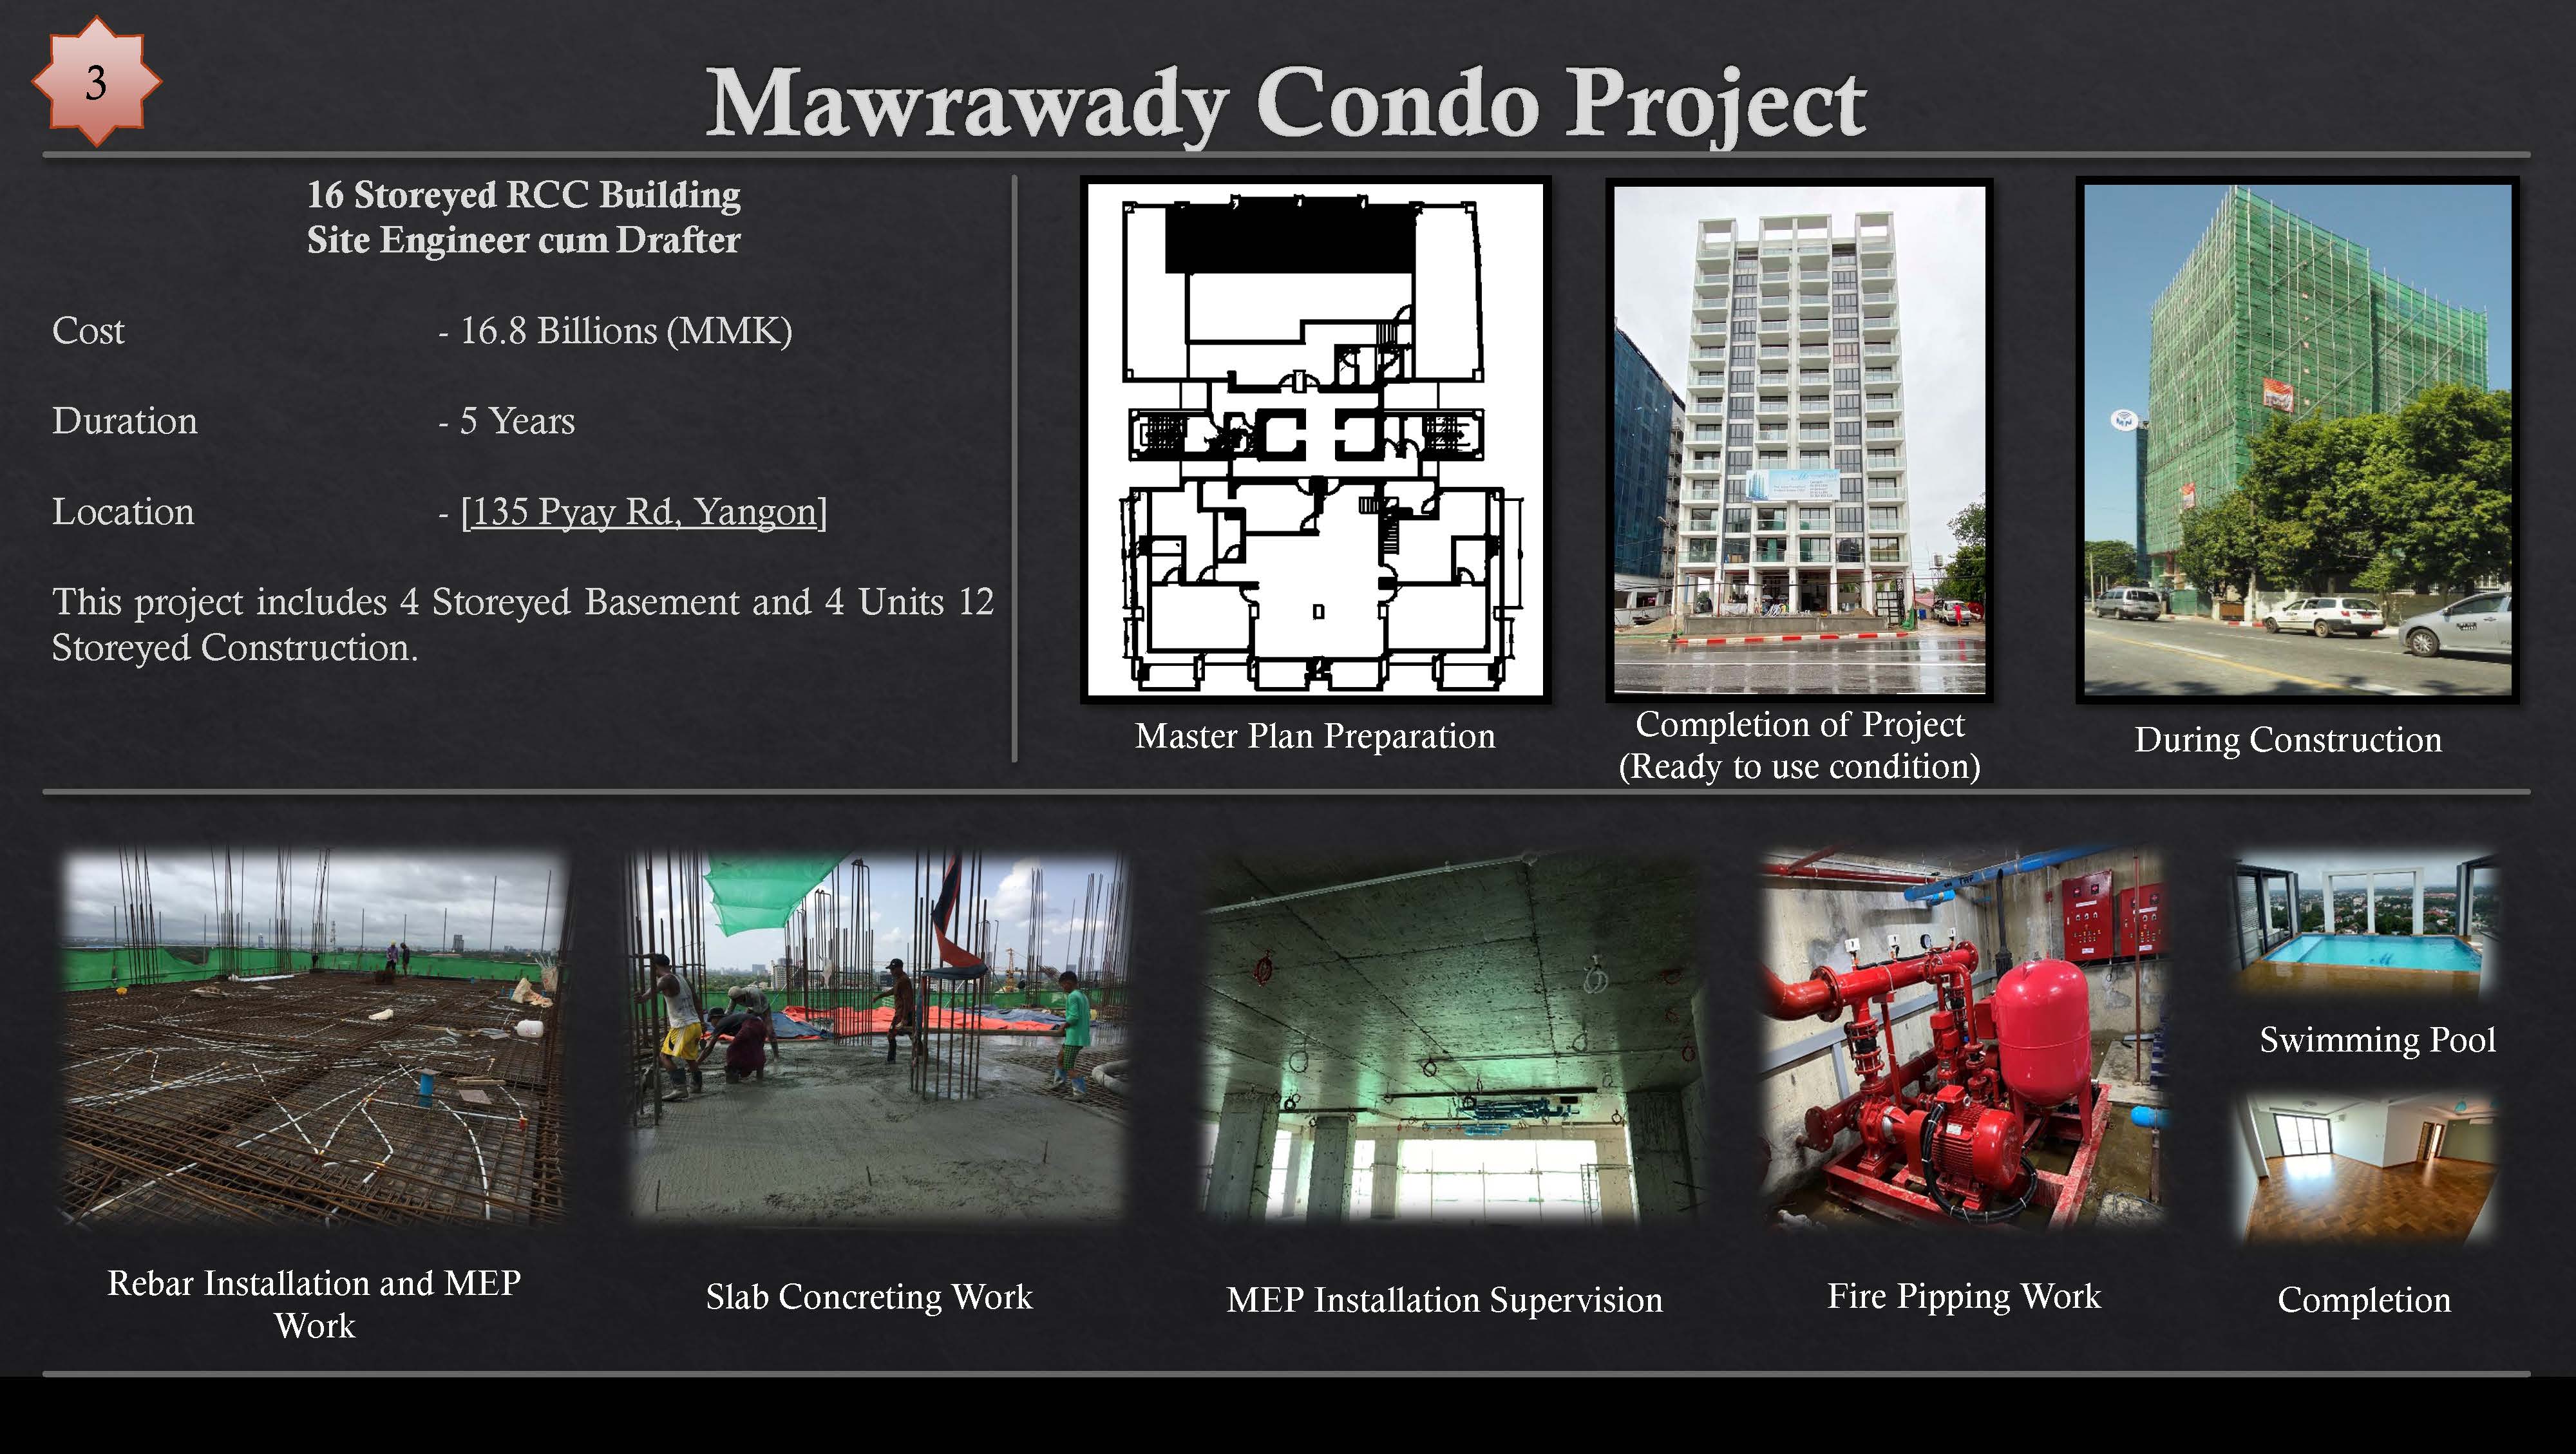 Mawrawady Condo Project

16 Storeyed RCC Building
Site Engineer cum Drafter

Glo} - 16.8 Billions (MMK)
Duration SRR GETS
Location - [135 Pyay Rd, Yangon]

This project includes 4 Storeyed Basement and 4 Units 12
Storeyed Construction.

     

: — TE

Master Plan Preparation empl Oil THe fH DIST A Qe eg Tua le)0
(Ready to use condition)

 
  
  
 

  

ft |

TTT rp
ET === :
Ht CET ay
RT ar

BH E

IS L 1]

 

Rebar Installation and MEP SP RO Te CT Lee
Work

MEP Installation Supervision Fire Pipping Work Completion